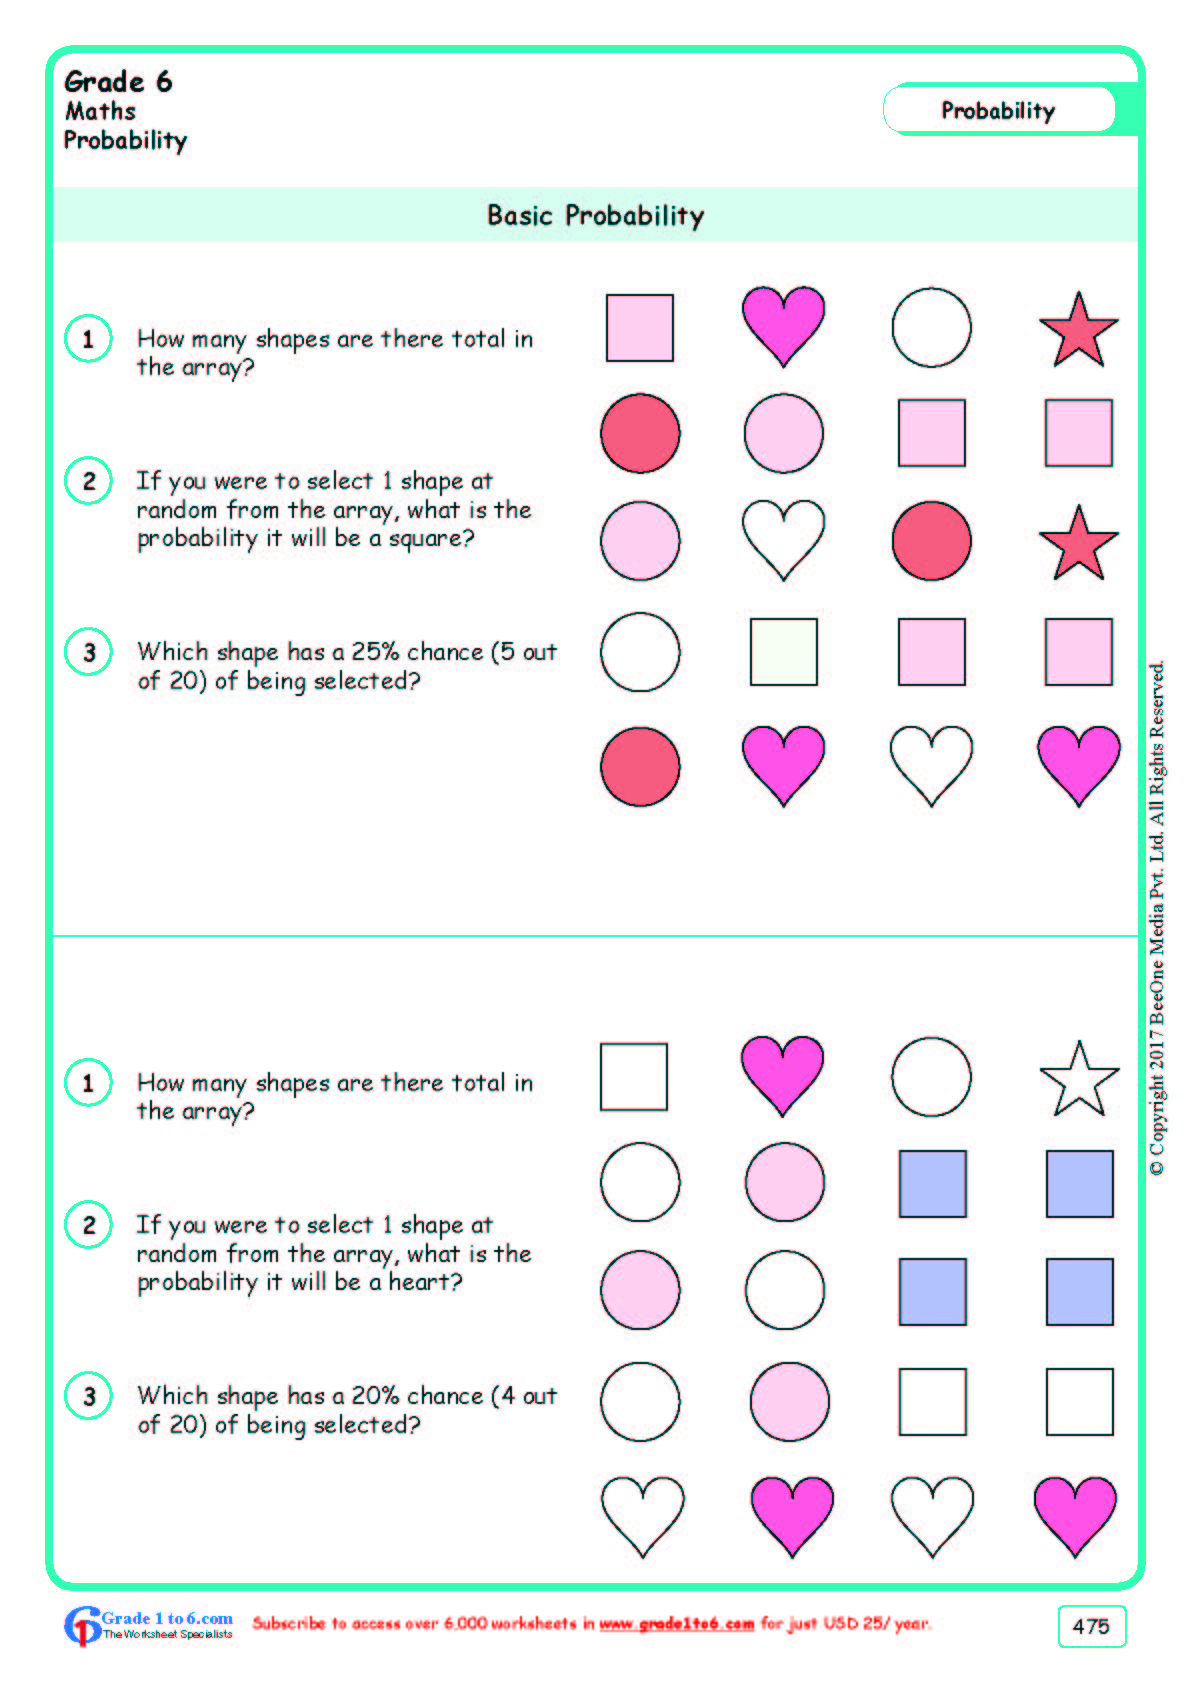 grade-6-basic-probability-worksheets-www-grade1to6